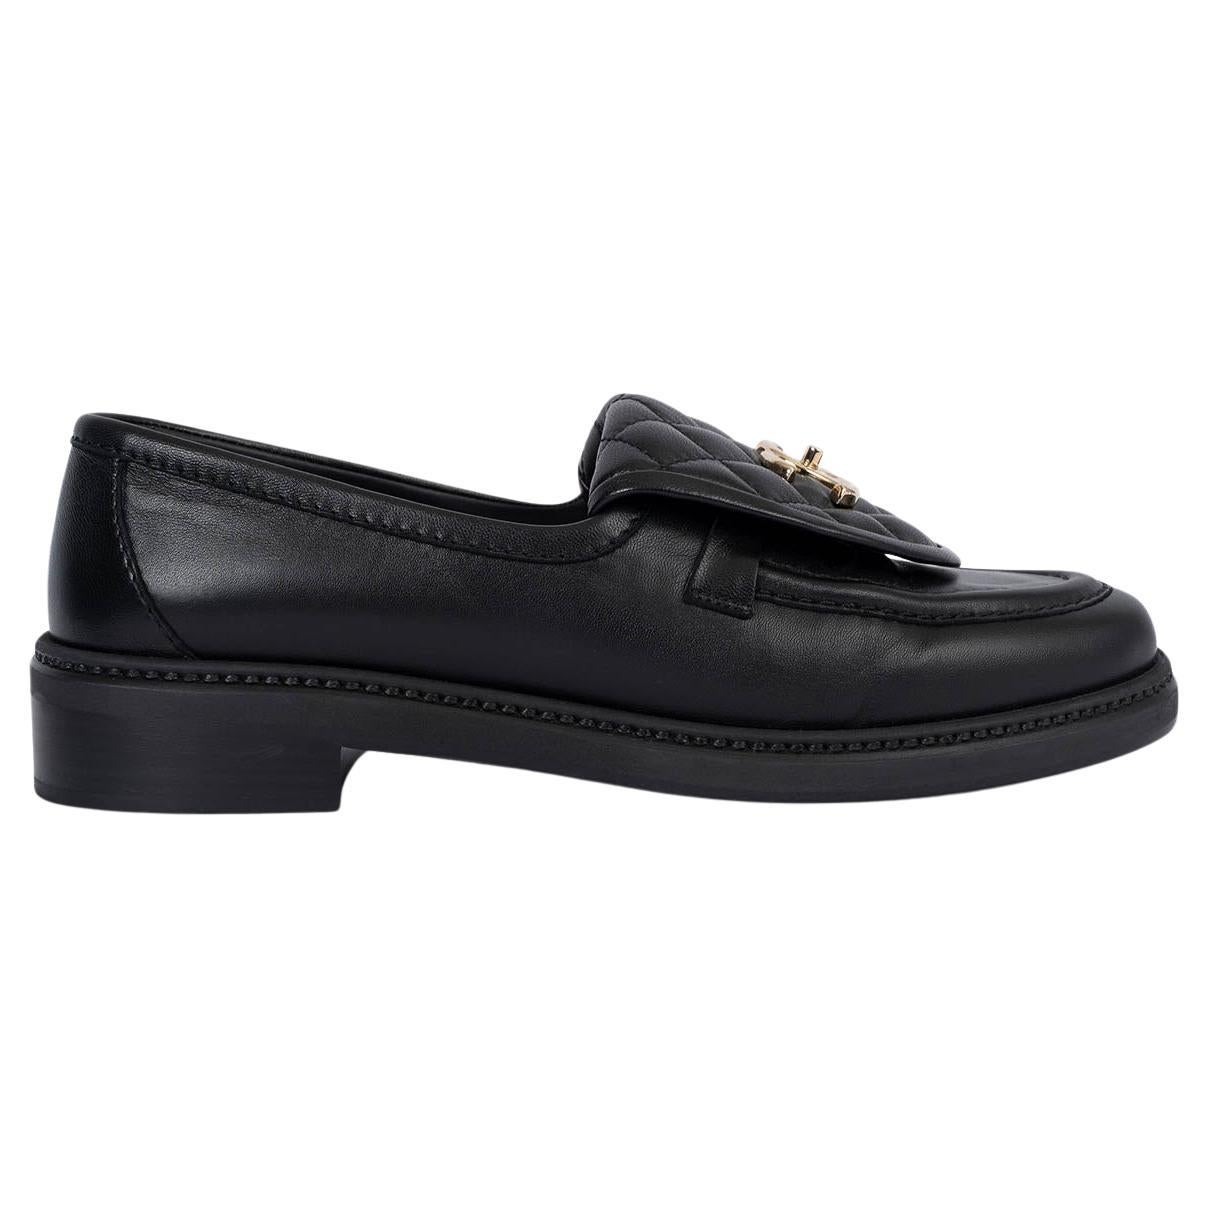 CHANEL black leather REV TURNLOCK Loafers Shoes 39 For Sale